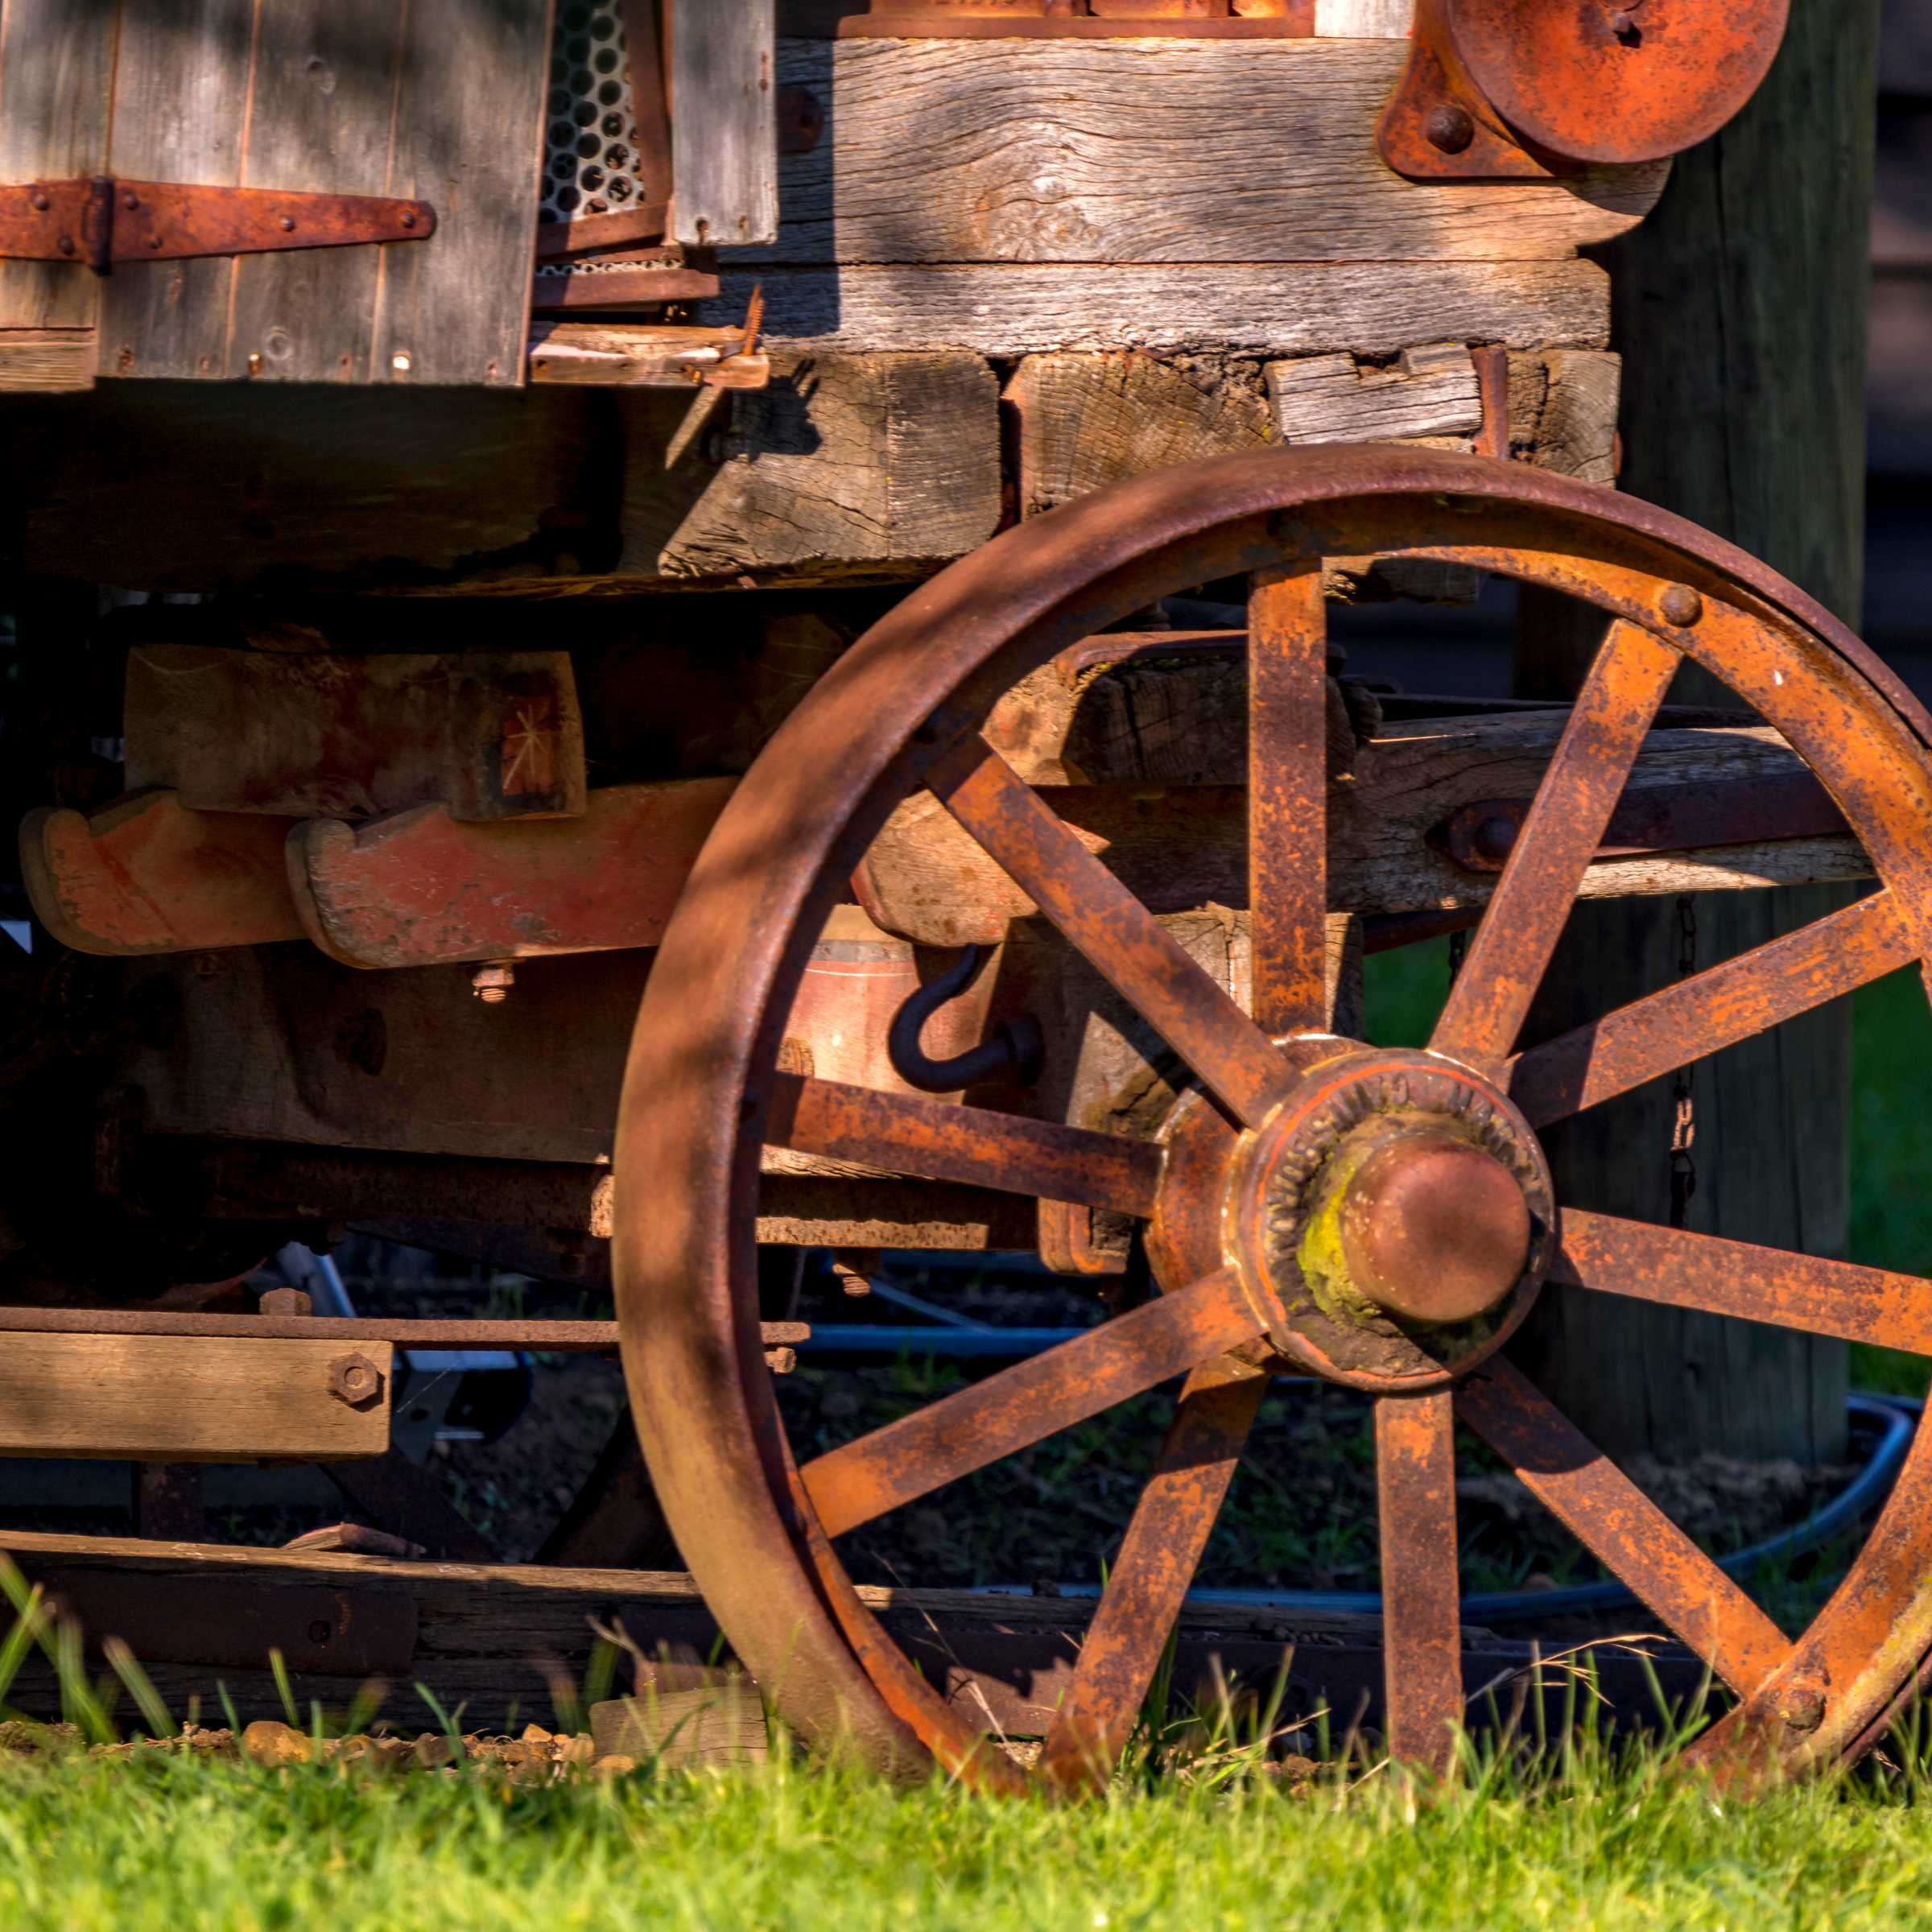 A steel spoked wheel and timber panelling are part of a Threshing machine that was used for harvesting grain. Circa 1900. Photo: Rob Burnett.